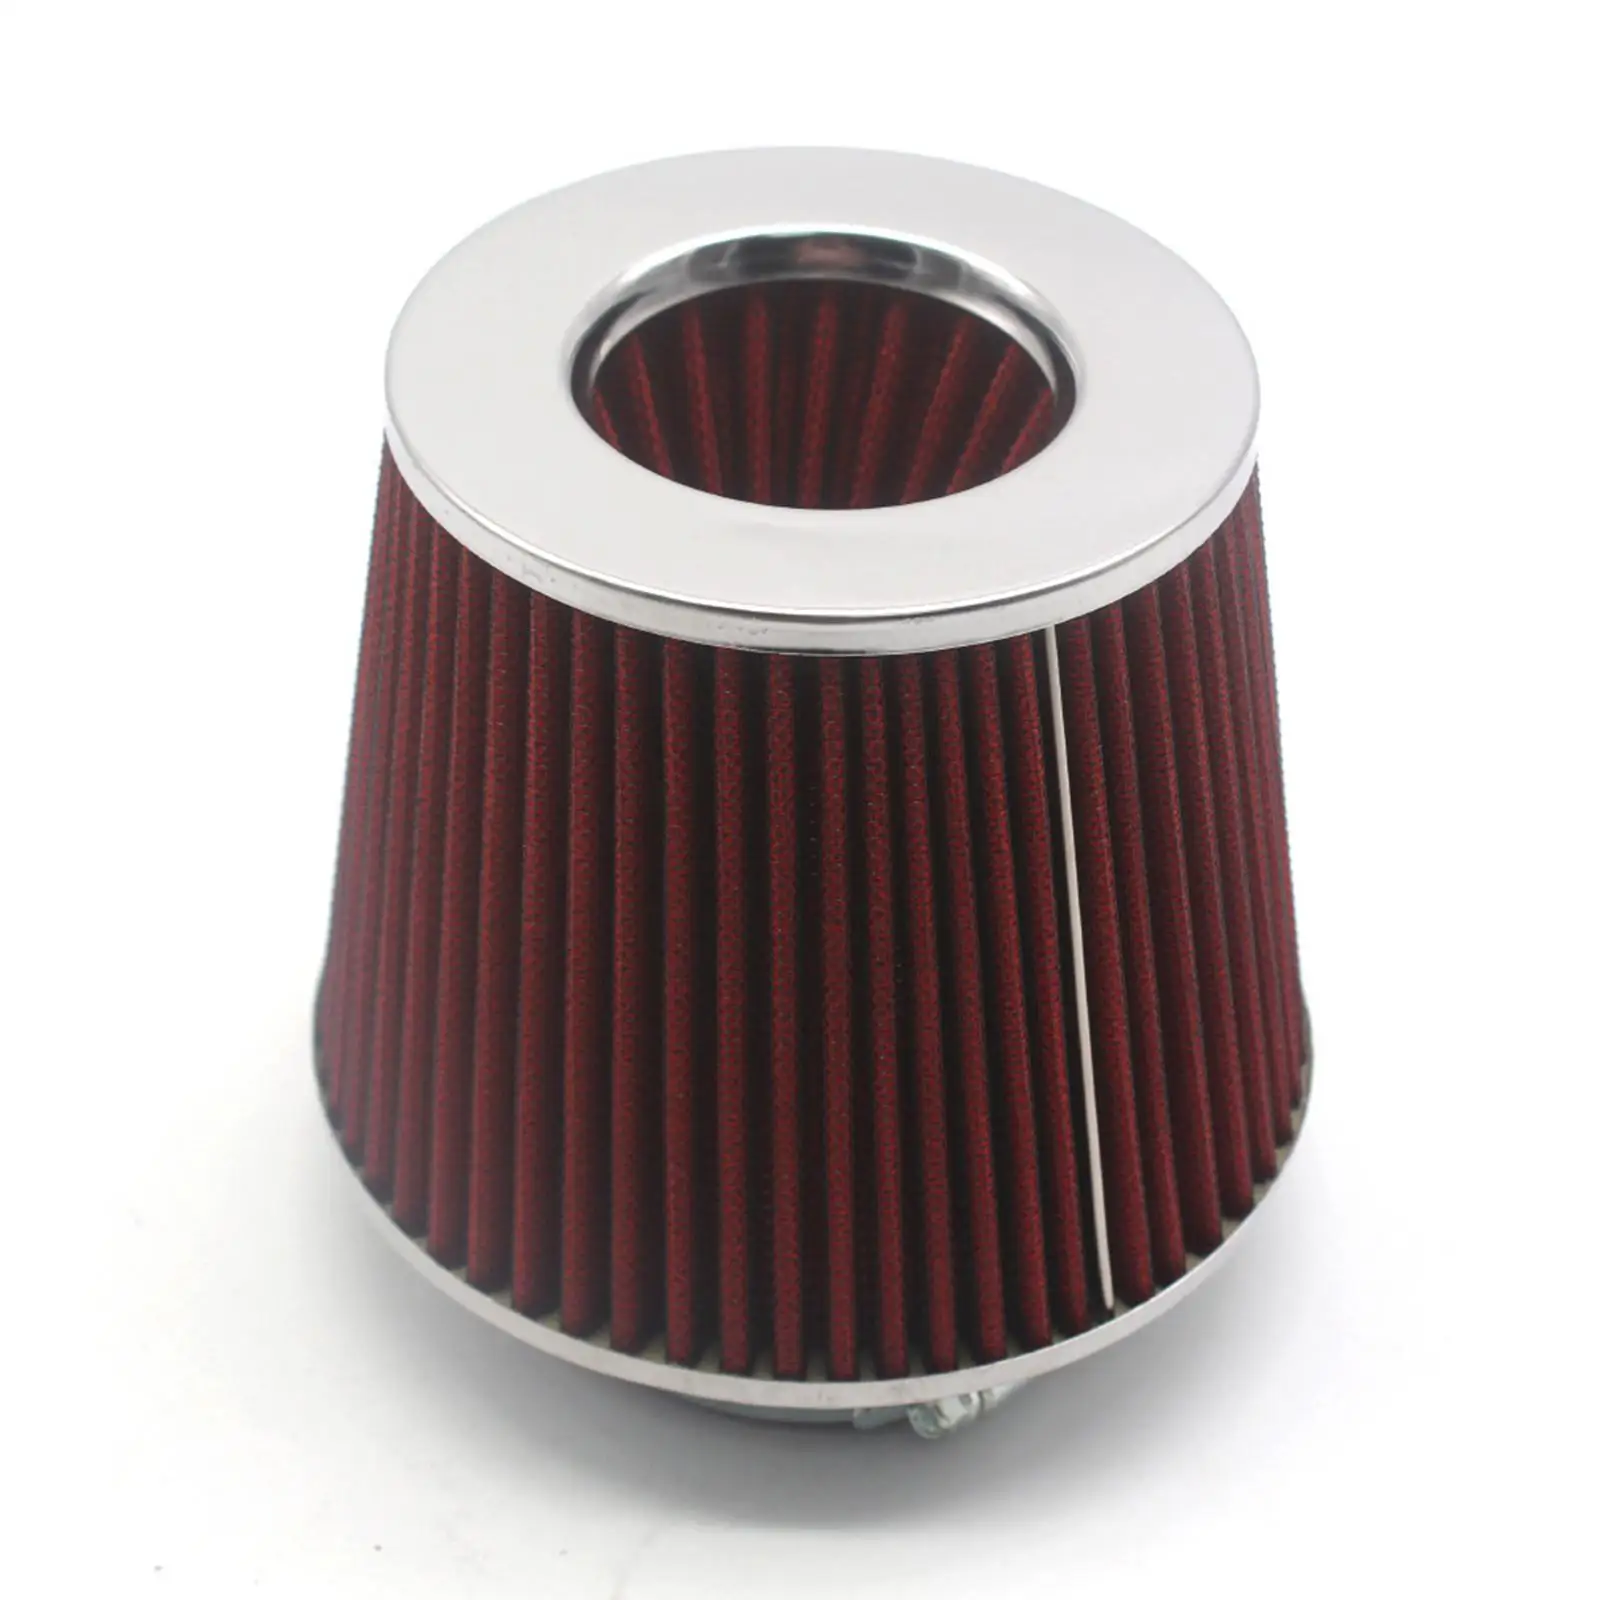 90mm Mushroom Head Air Filter Automobile Parts Round Cone Refitting Car Supplies Auto Parts Modified High Flow Intake Air Filter